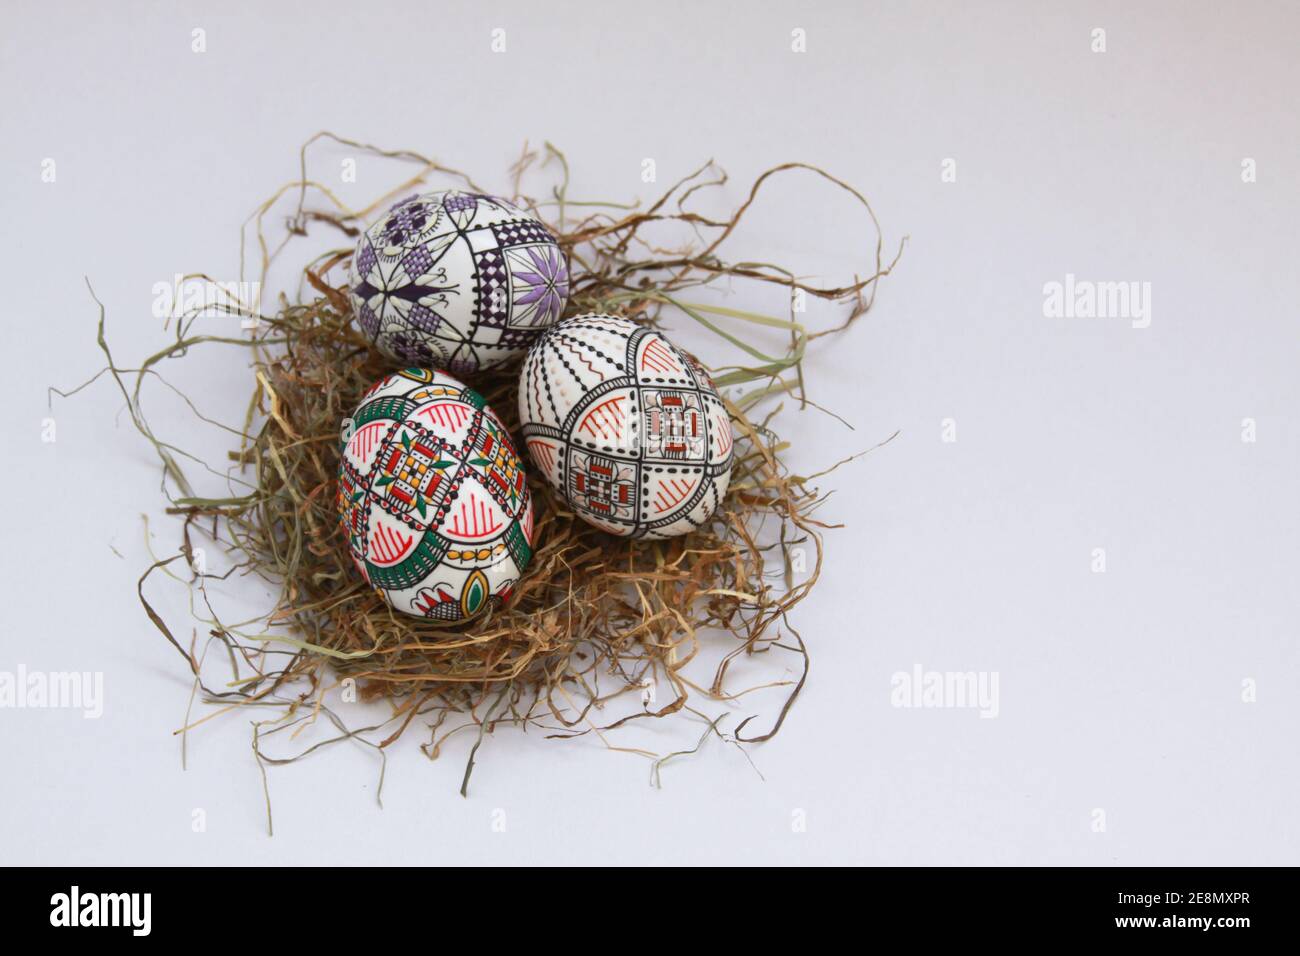 Isolated traditional handmade Easter eggs vintage decoration on hay. Seasonal motif on hand wax painting technique from Bucovina, Romania used to deco Stock Photo